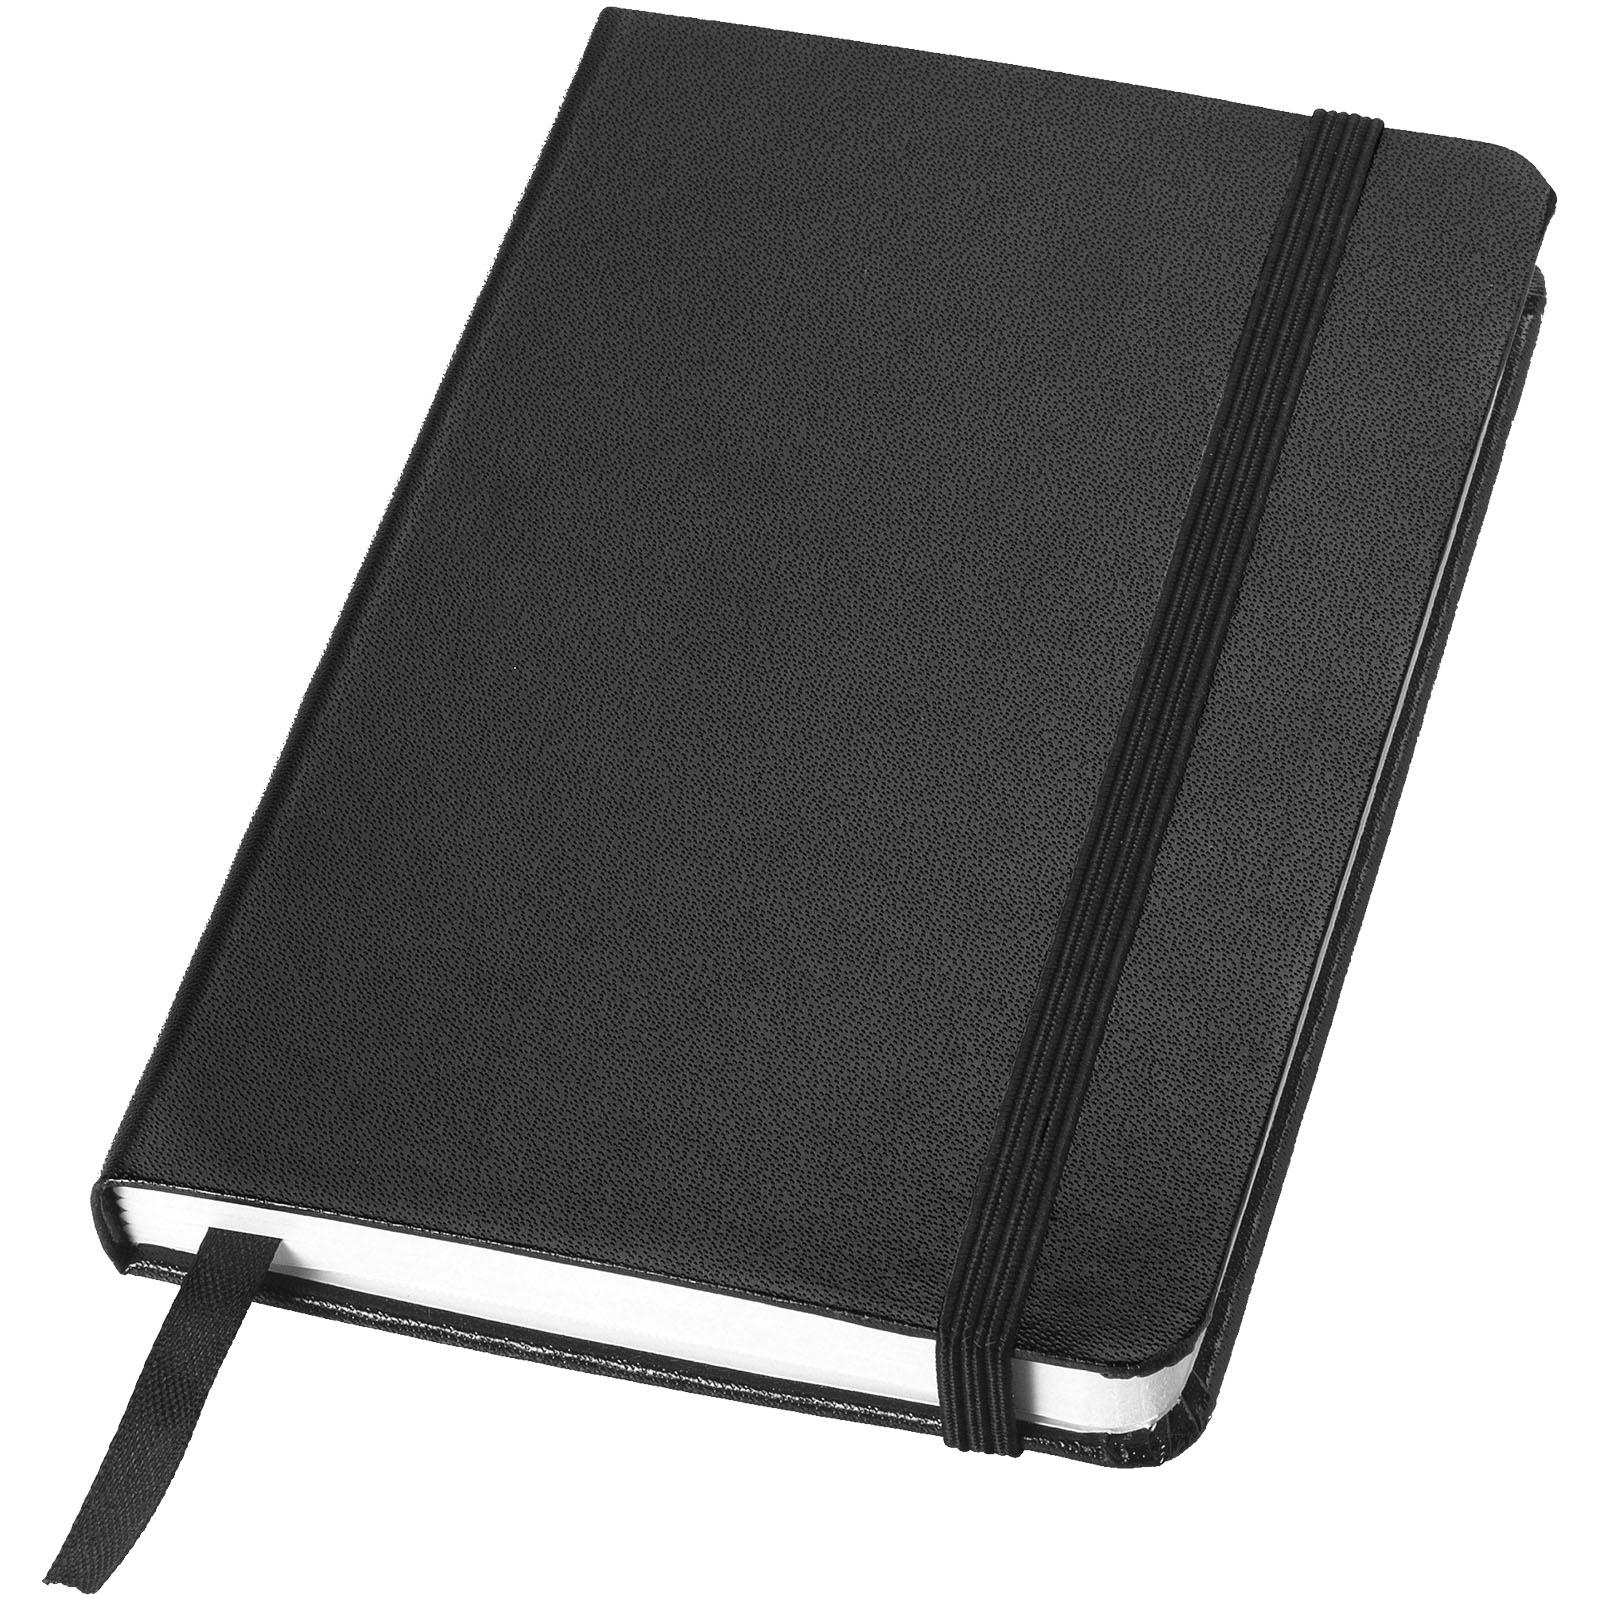 Hard cover notebooks - Classic A6 hard cover pocket notebook